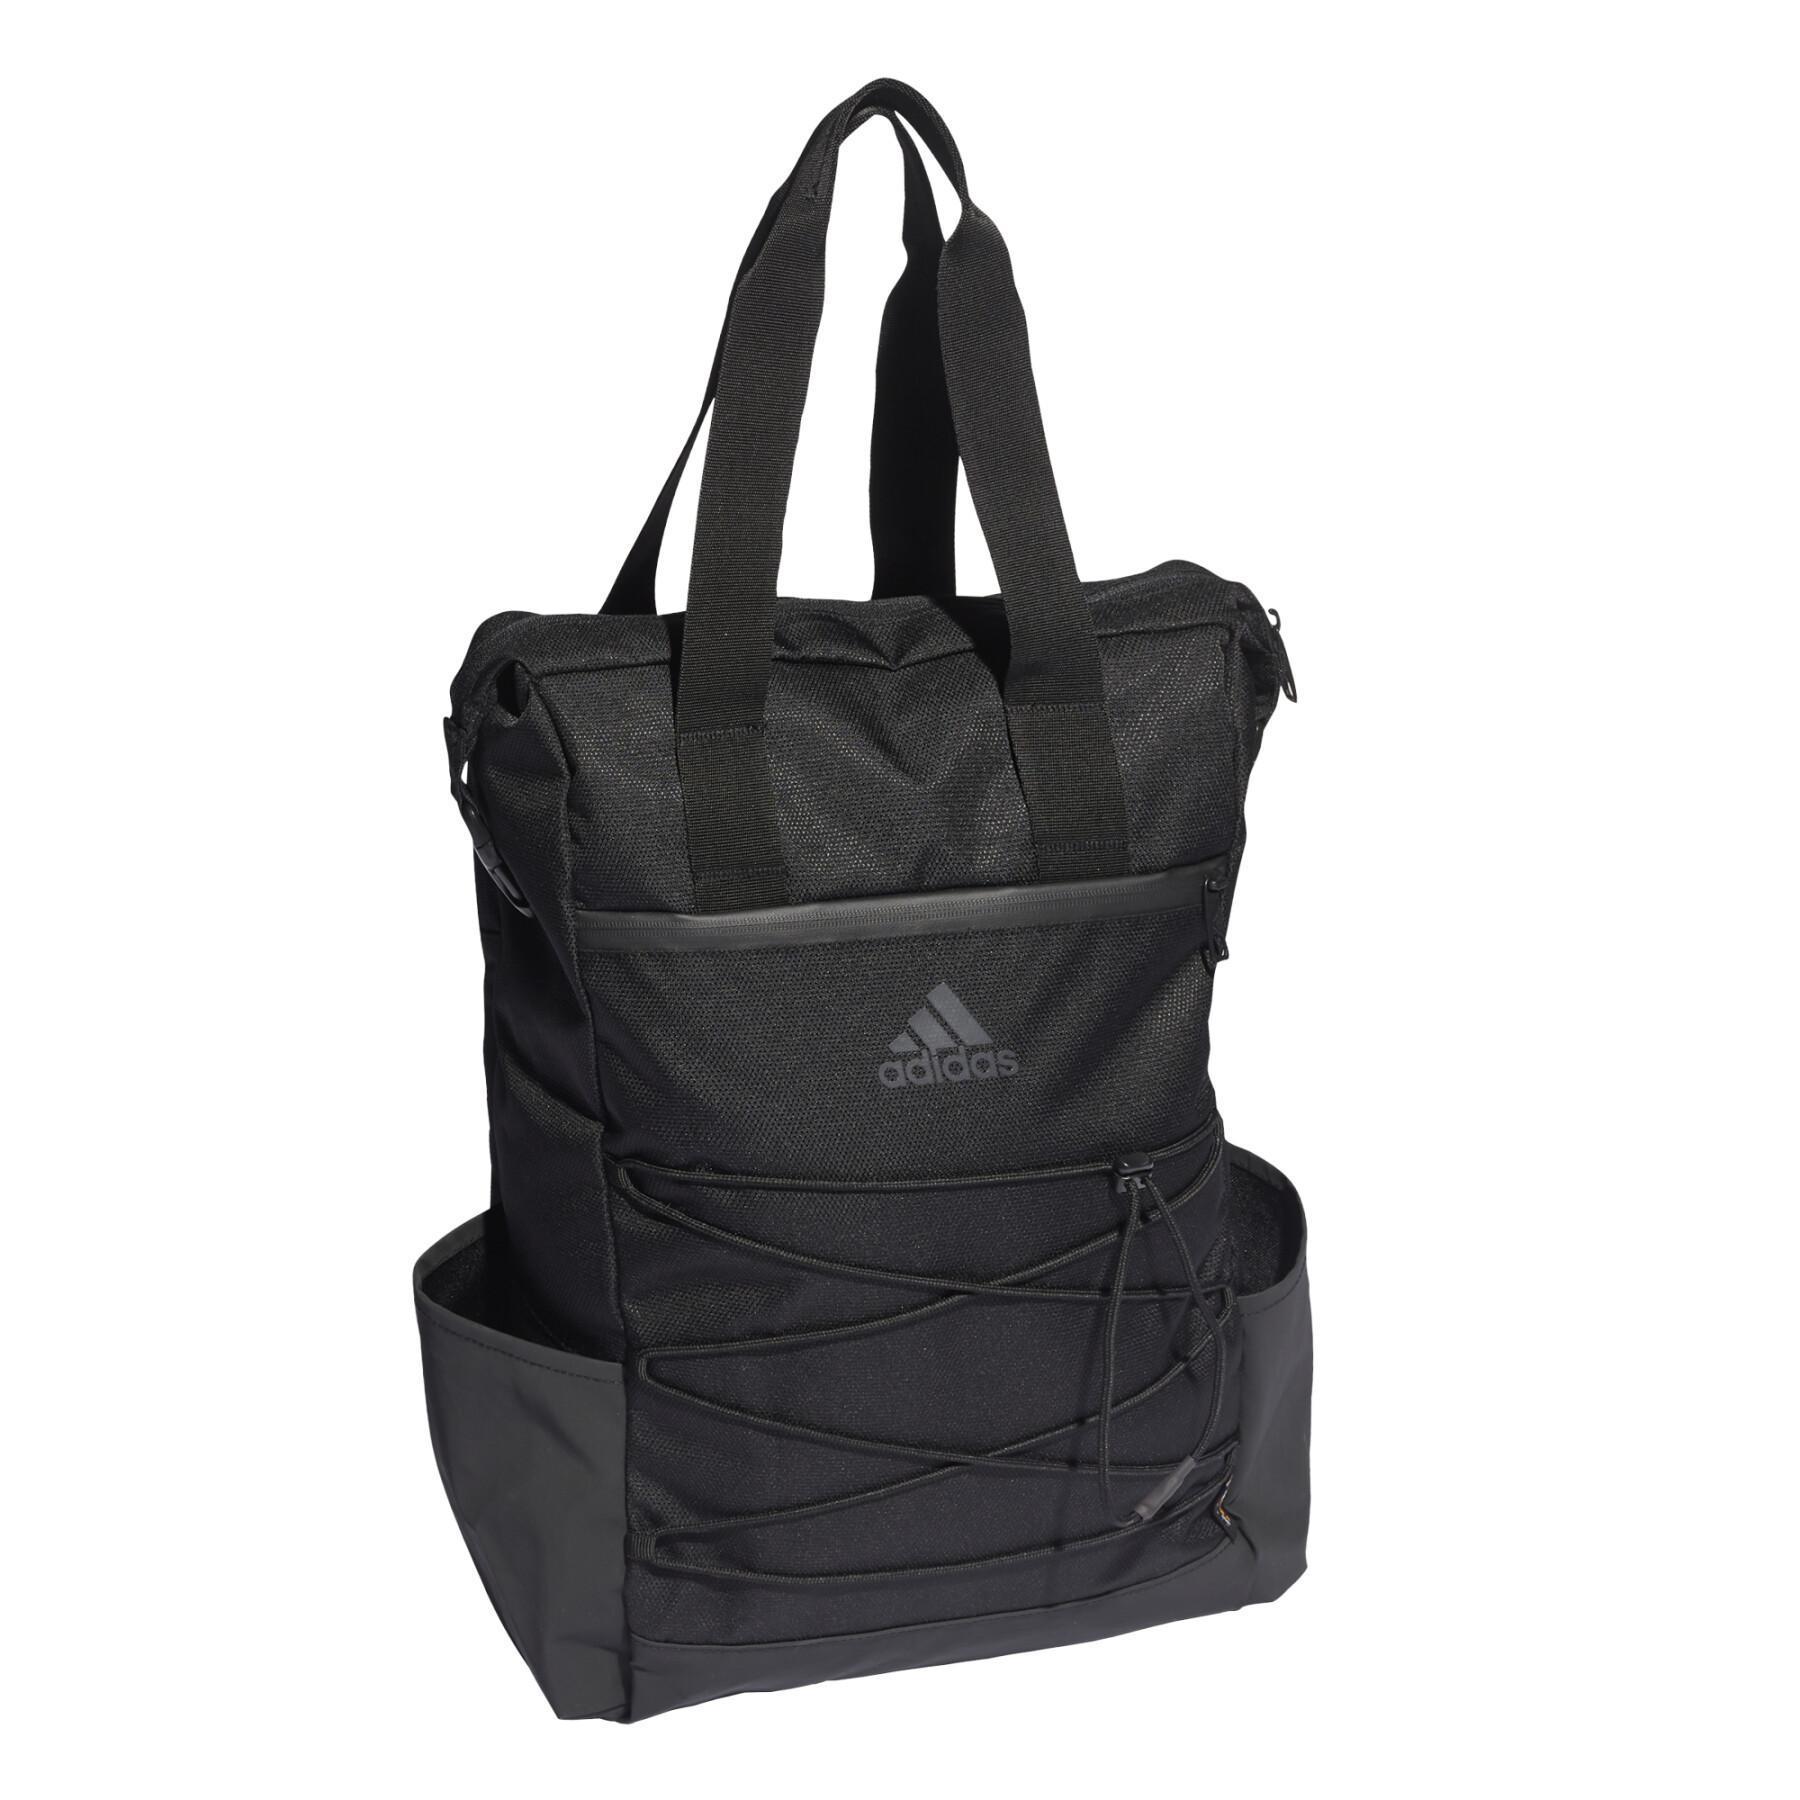 Backpack adidas Classic Tote